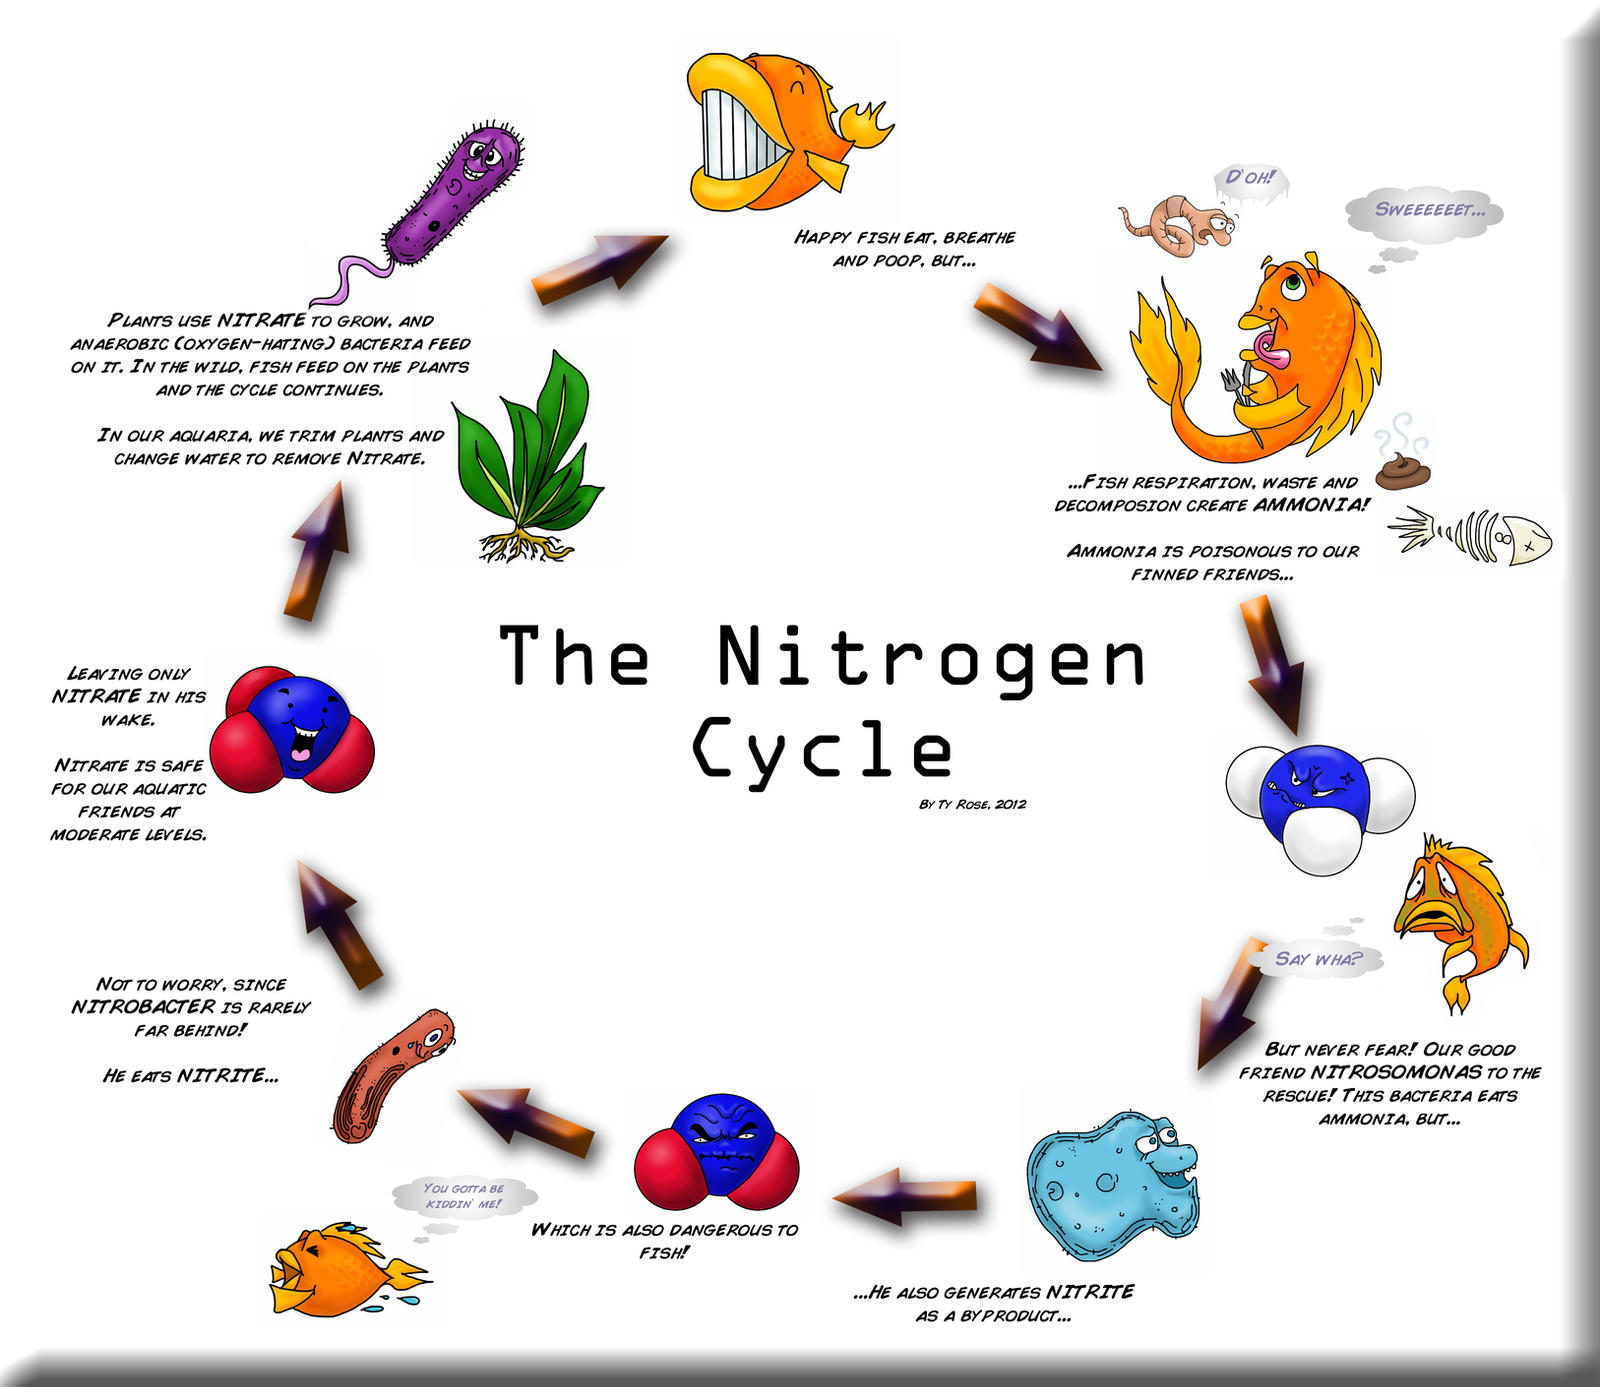 The Nitrogen Cycle by QuinapalusTheFool on DeviantArt